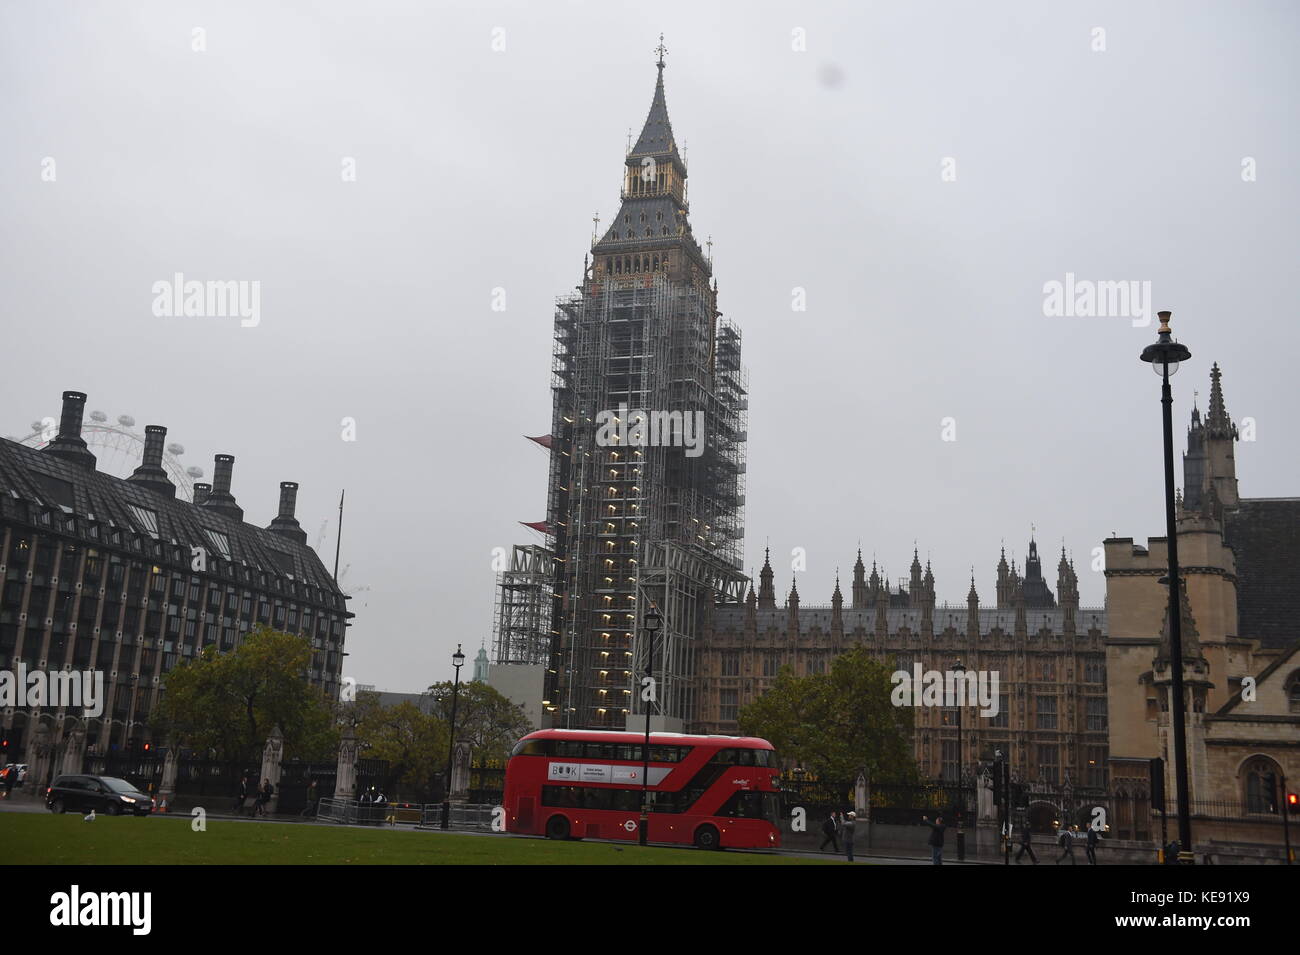 Big Ben covered in scaffolding today  Picture Jeremy Selwyn  Credit: Evening Standard Stock Photo